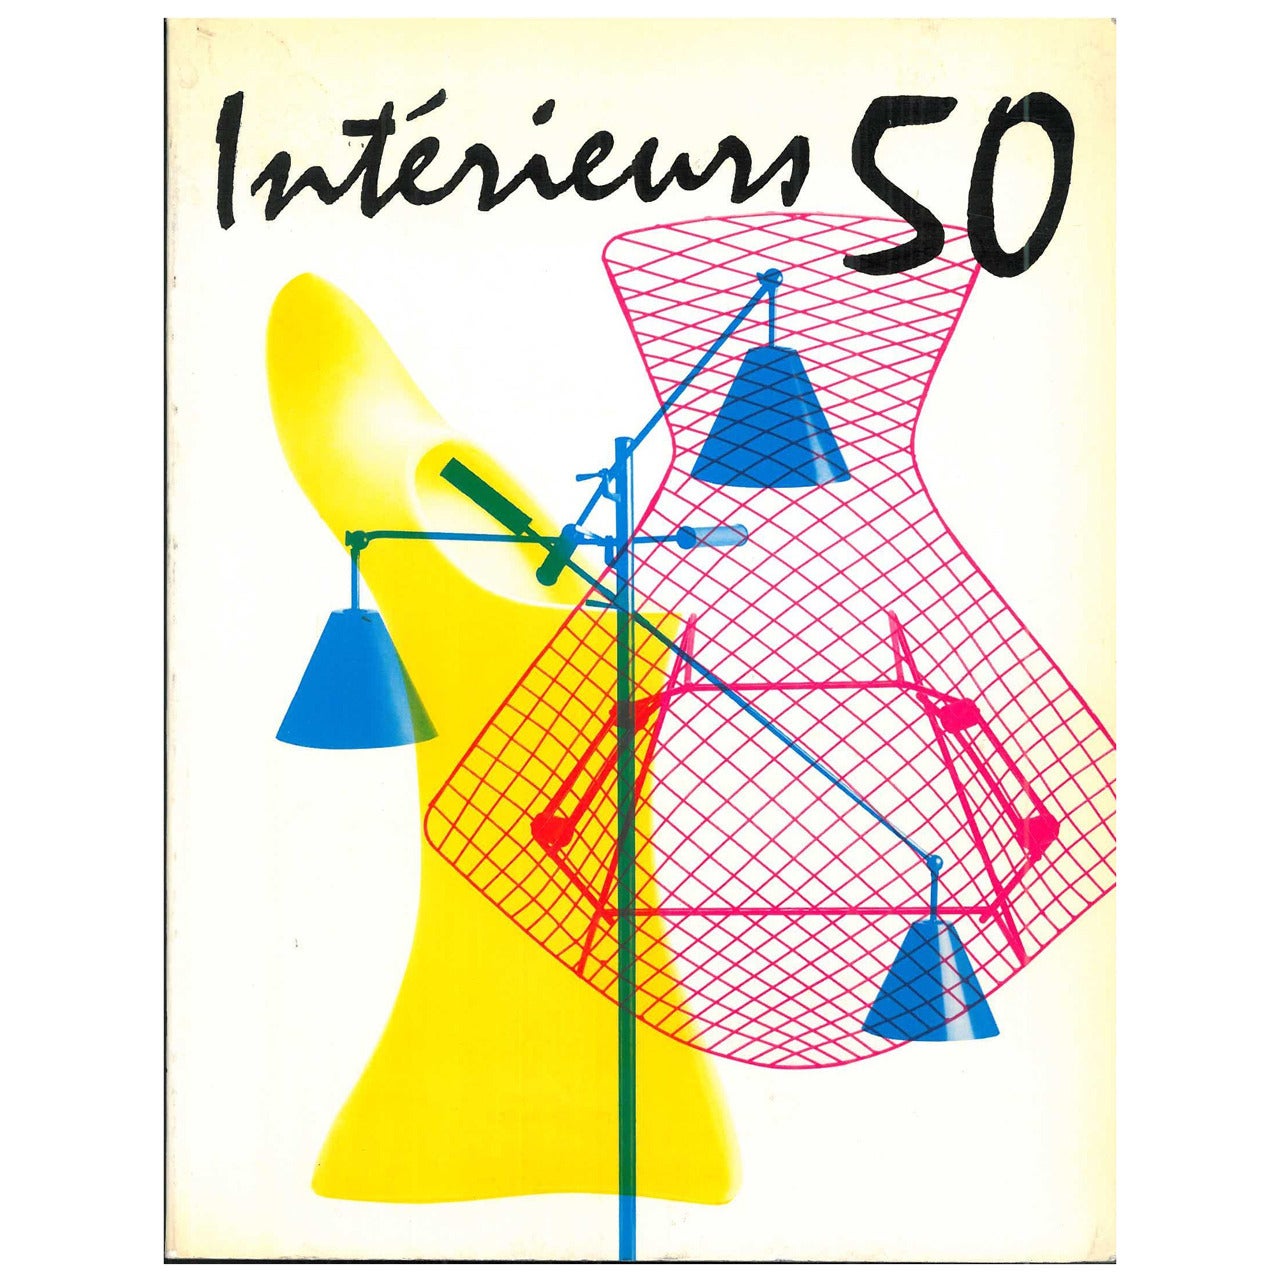 Interieurs 50 (Book) For Sale